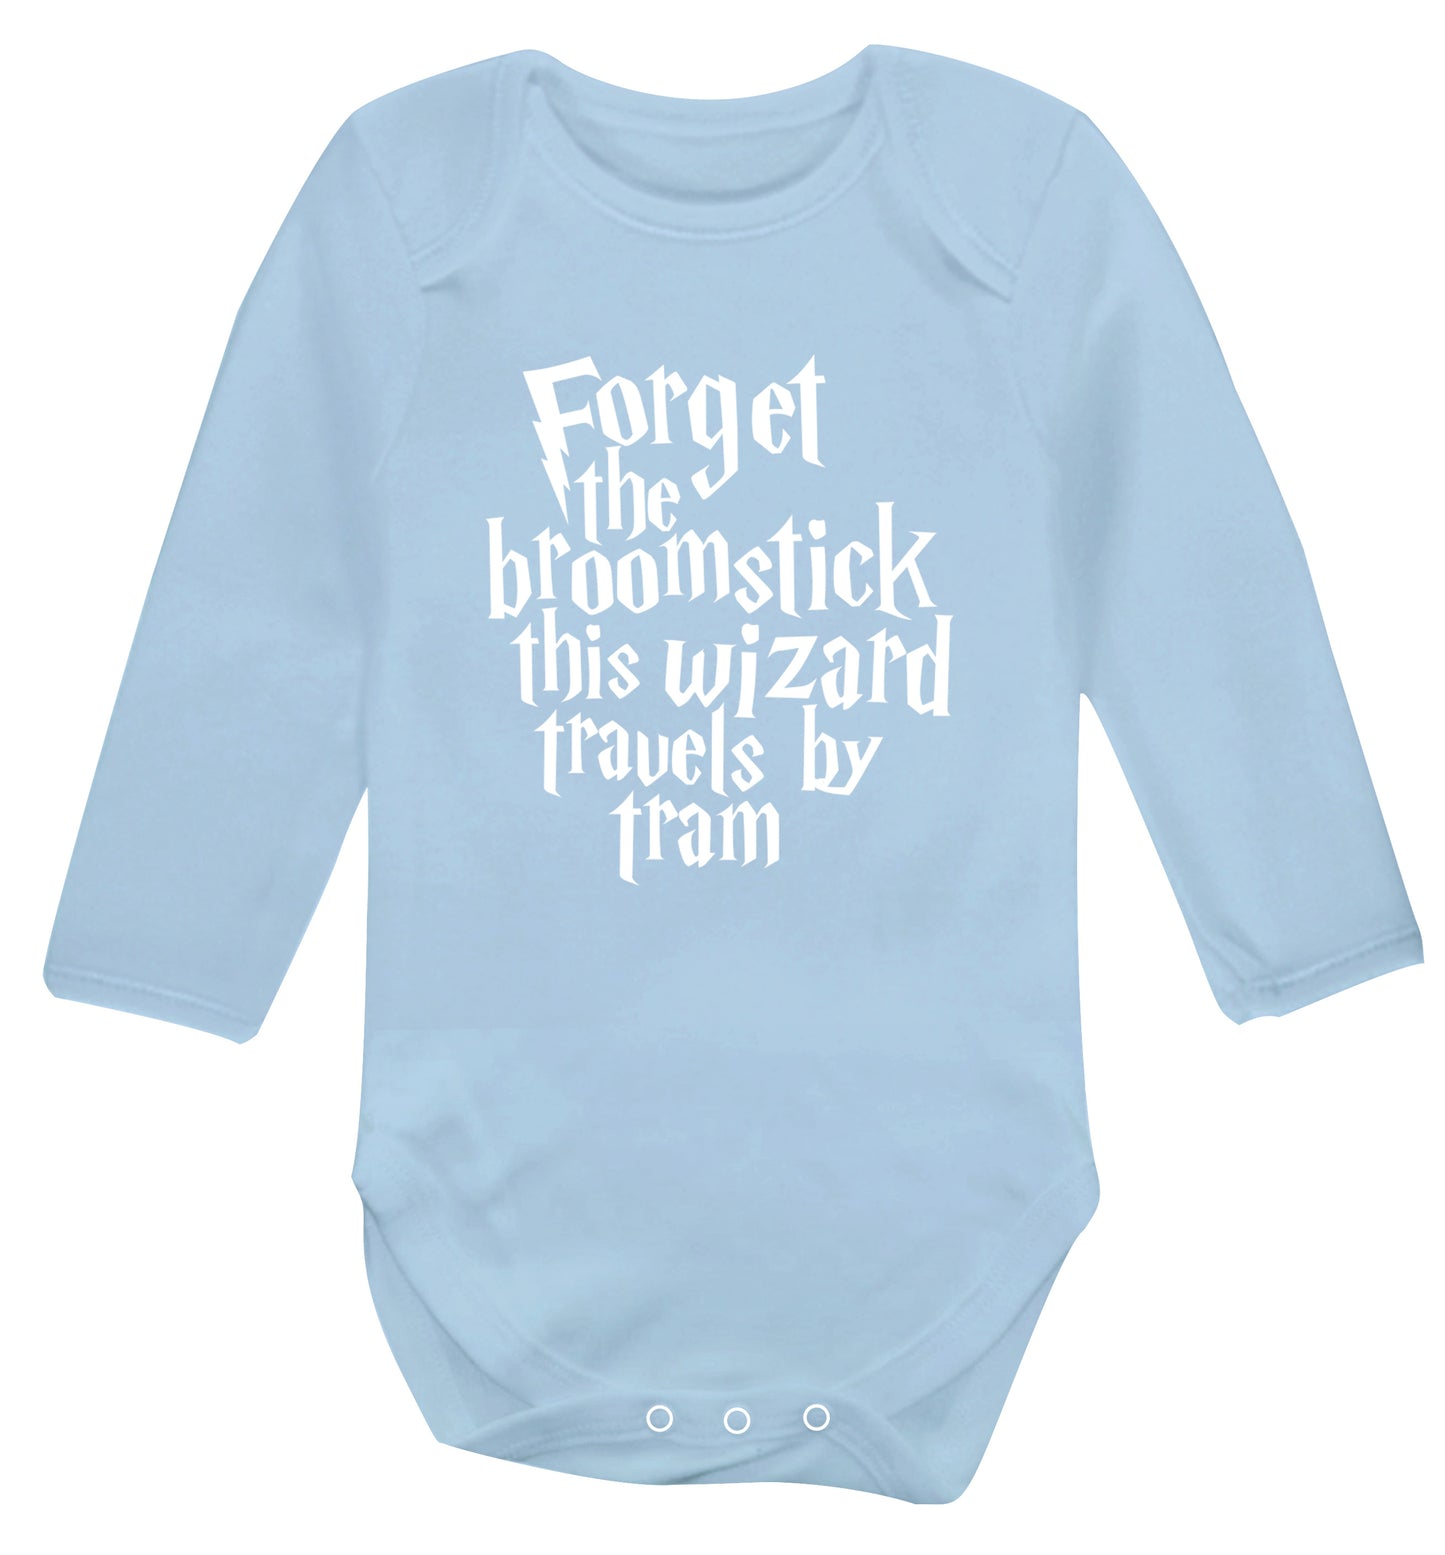 Forget the broomstick this wizard travels by tram Baby Vest long sleeved pale blue 6-12 months